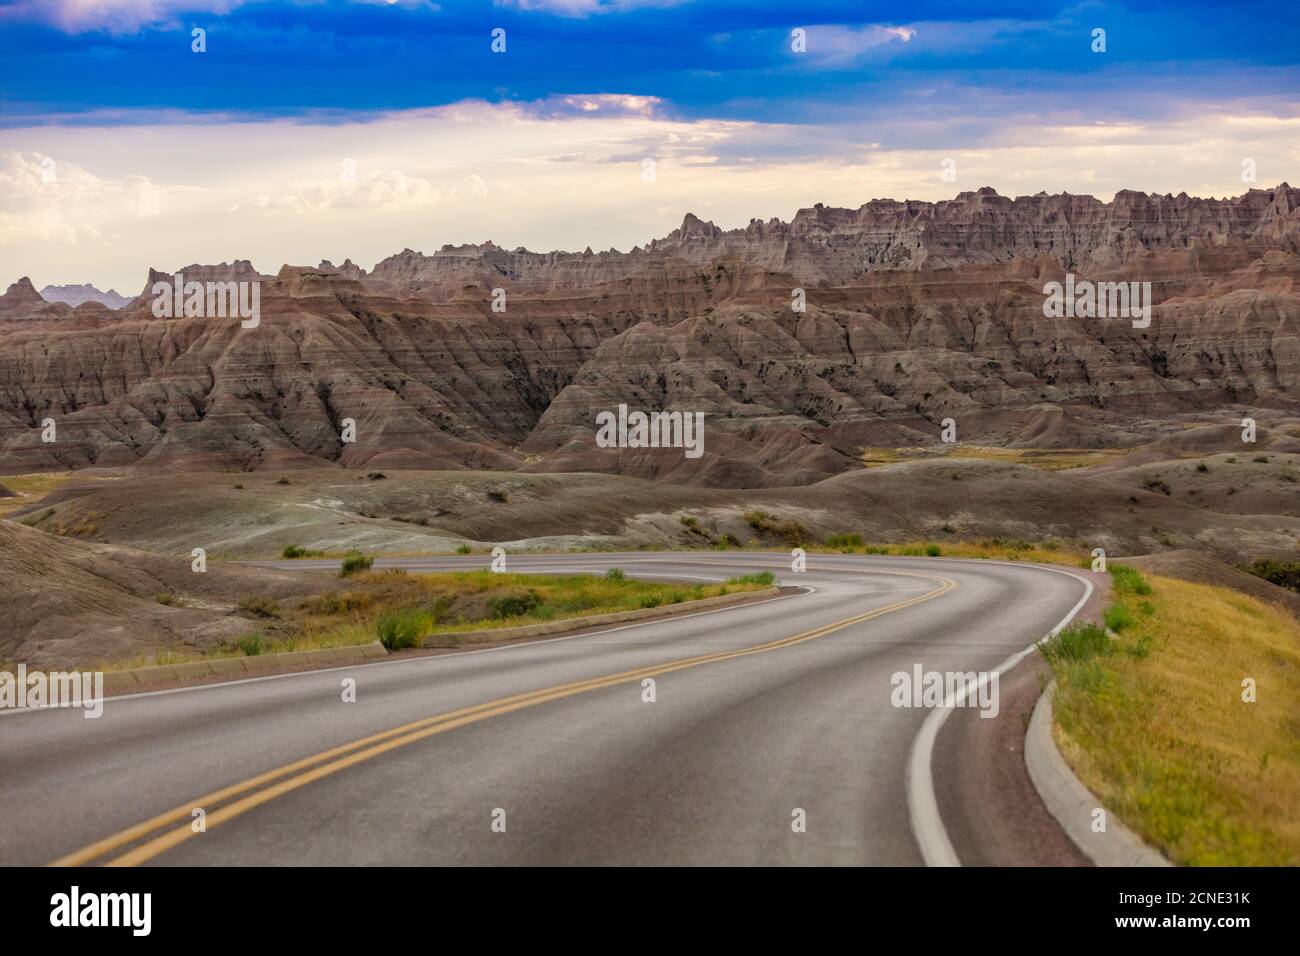 Driving and sightseeing in the Badlands National Park, South Dakota, United States of America Stock Photo